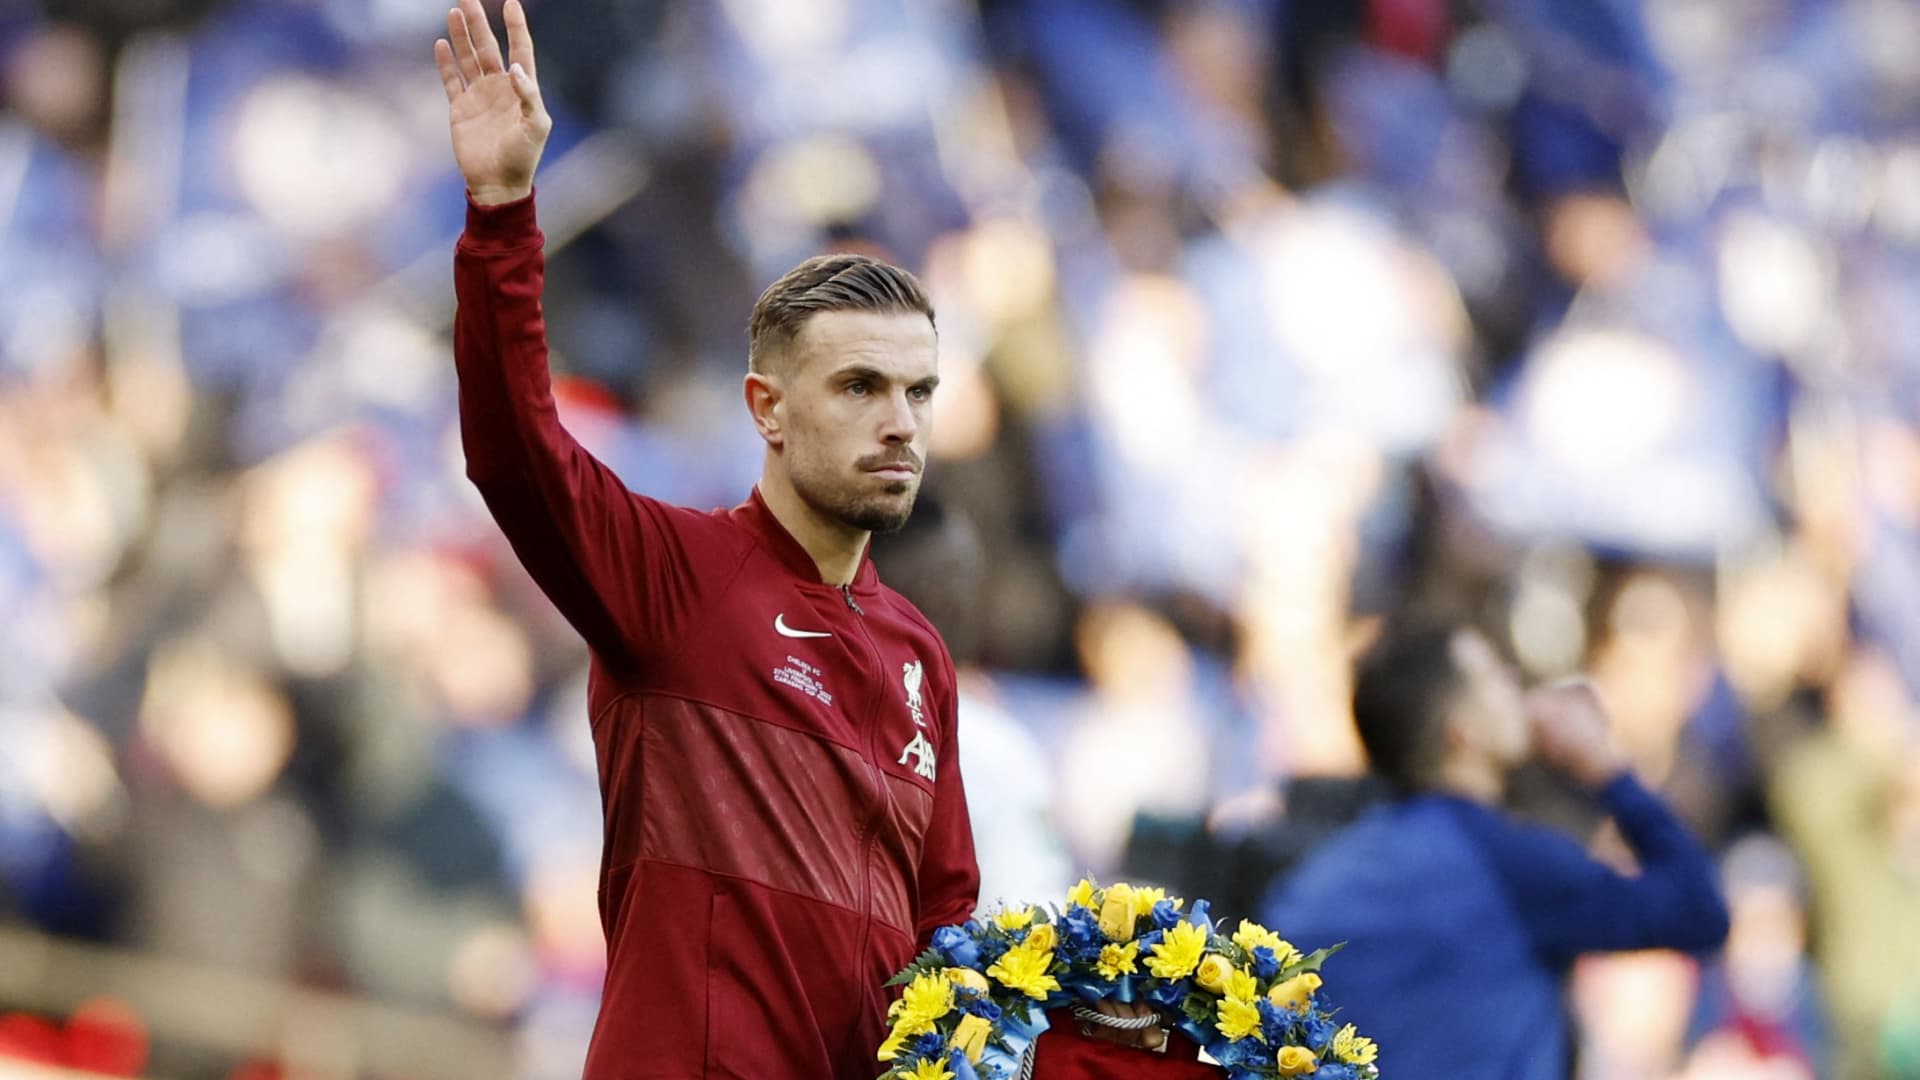 Soccer Football - Carabao Cup Final - Chelsea v Liverpool - Wembley Stadium, London, Britain - February 27, 2022 Liverpool's Jordan Henderson holds a wreath in support of Ukraine before the match